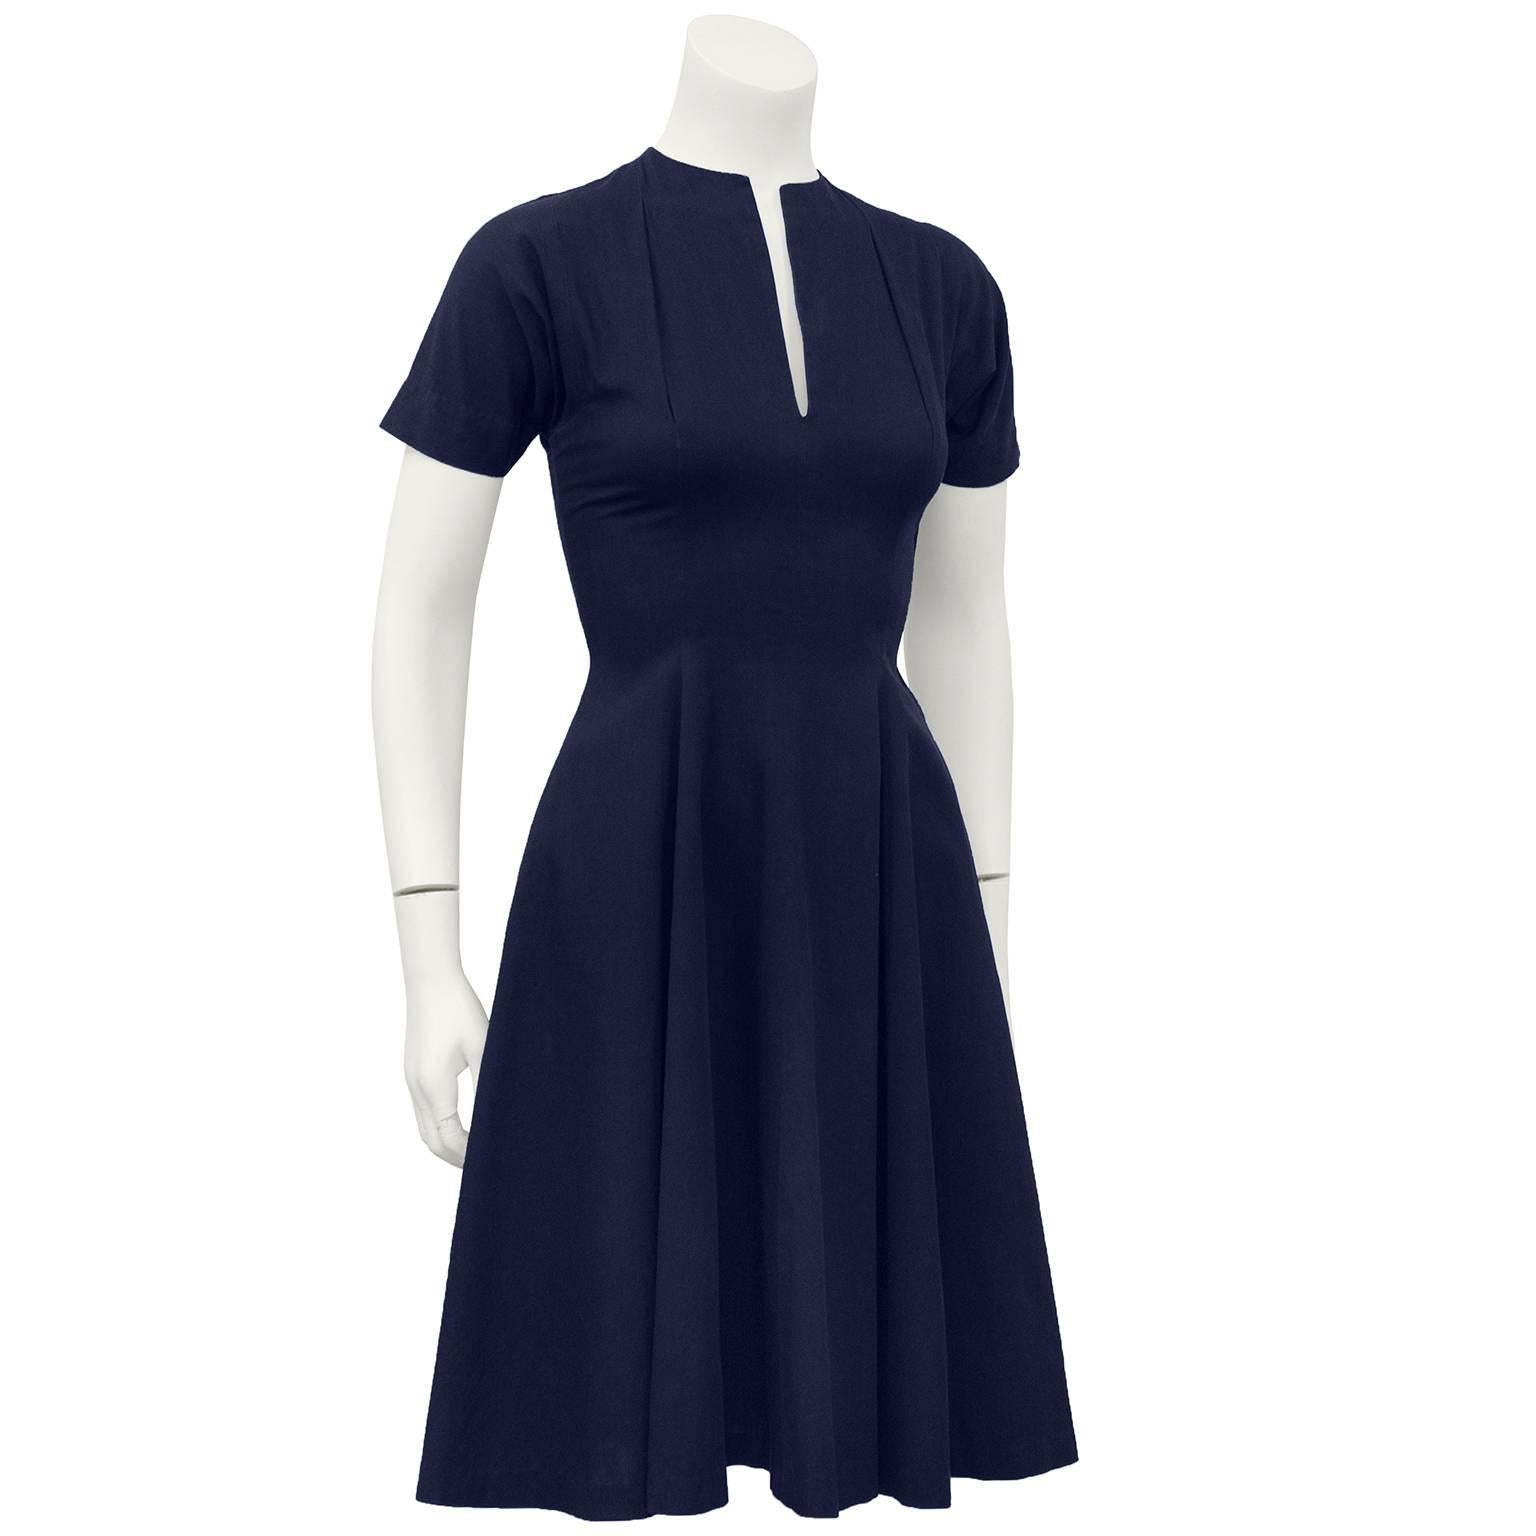 1950s' navy blue Claire McCardell cotton fit and flare dress. Fitted bodice with short sleeves, narrow v neckline, inverted darting above bust and flared a-line skirt. Very classic hard to find, Claire McCardell. Fits like a US 2 - very narrow